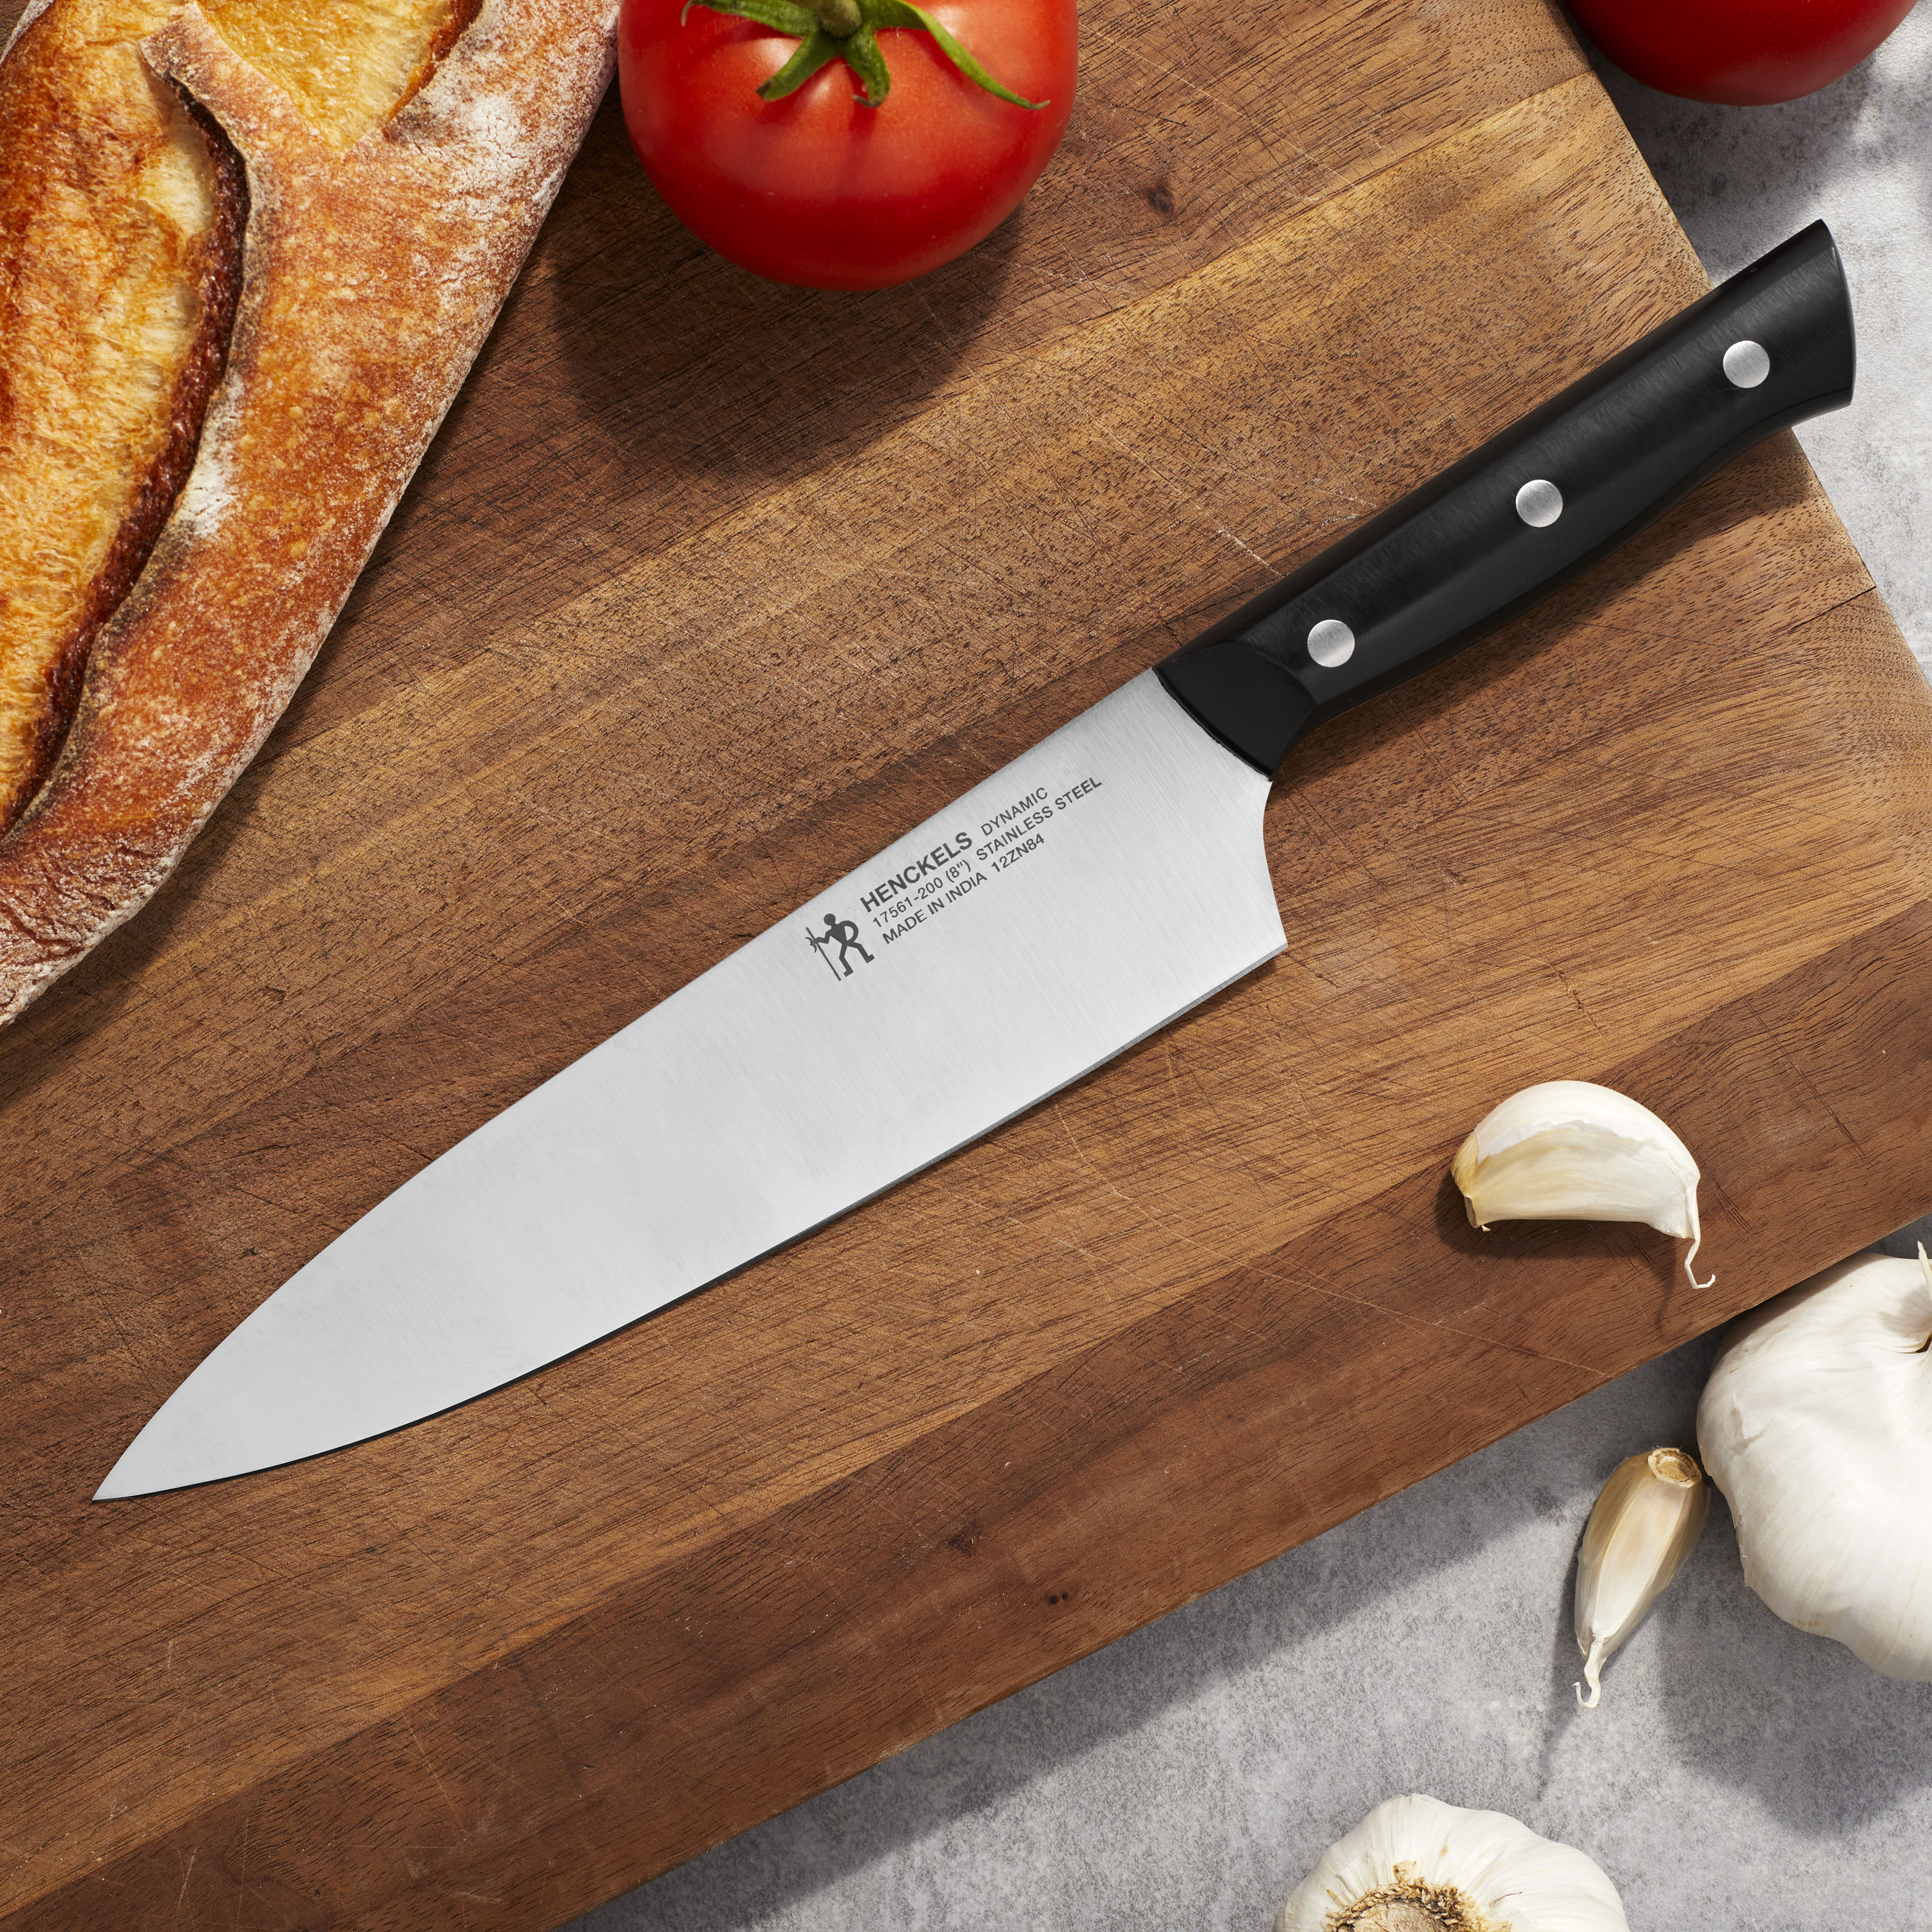 https://www.zwilling.com/on/demandware.static/-/Sites-zwilling-master-catalog/default/dw615a0b5f/images/large/750060245.jpg